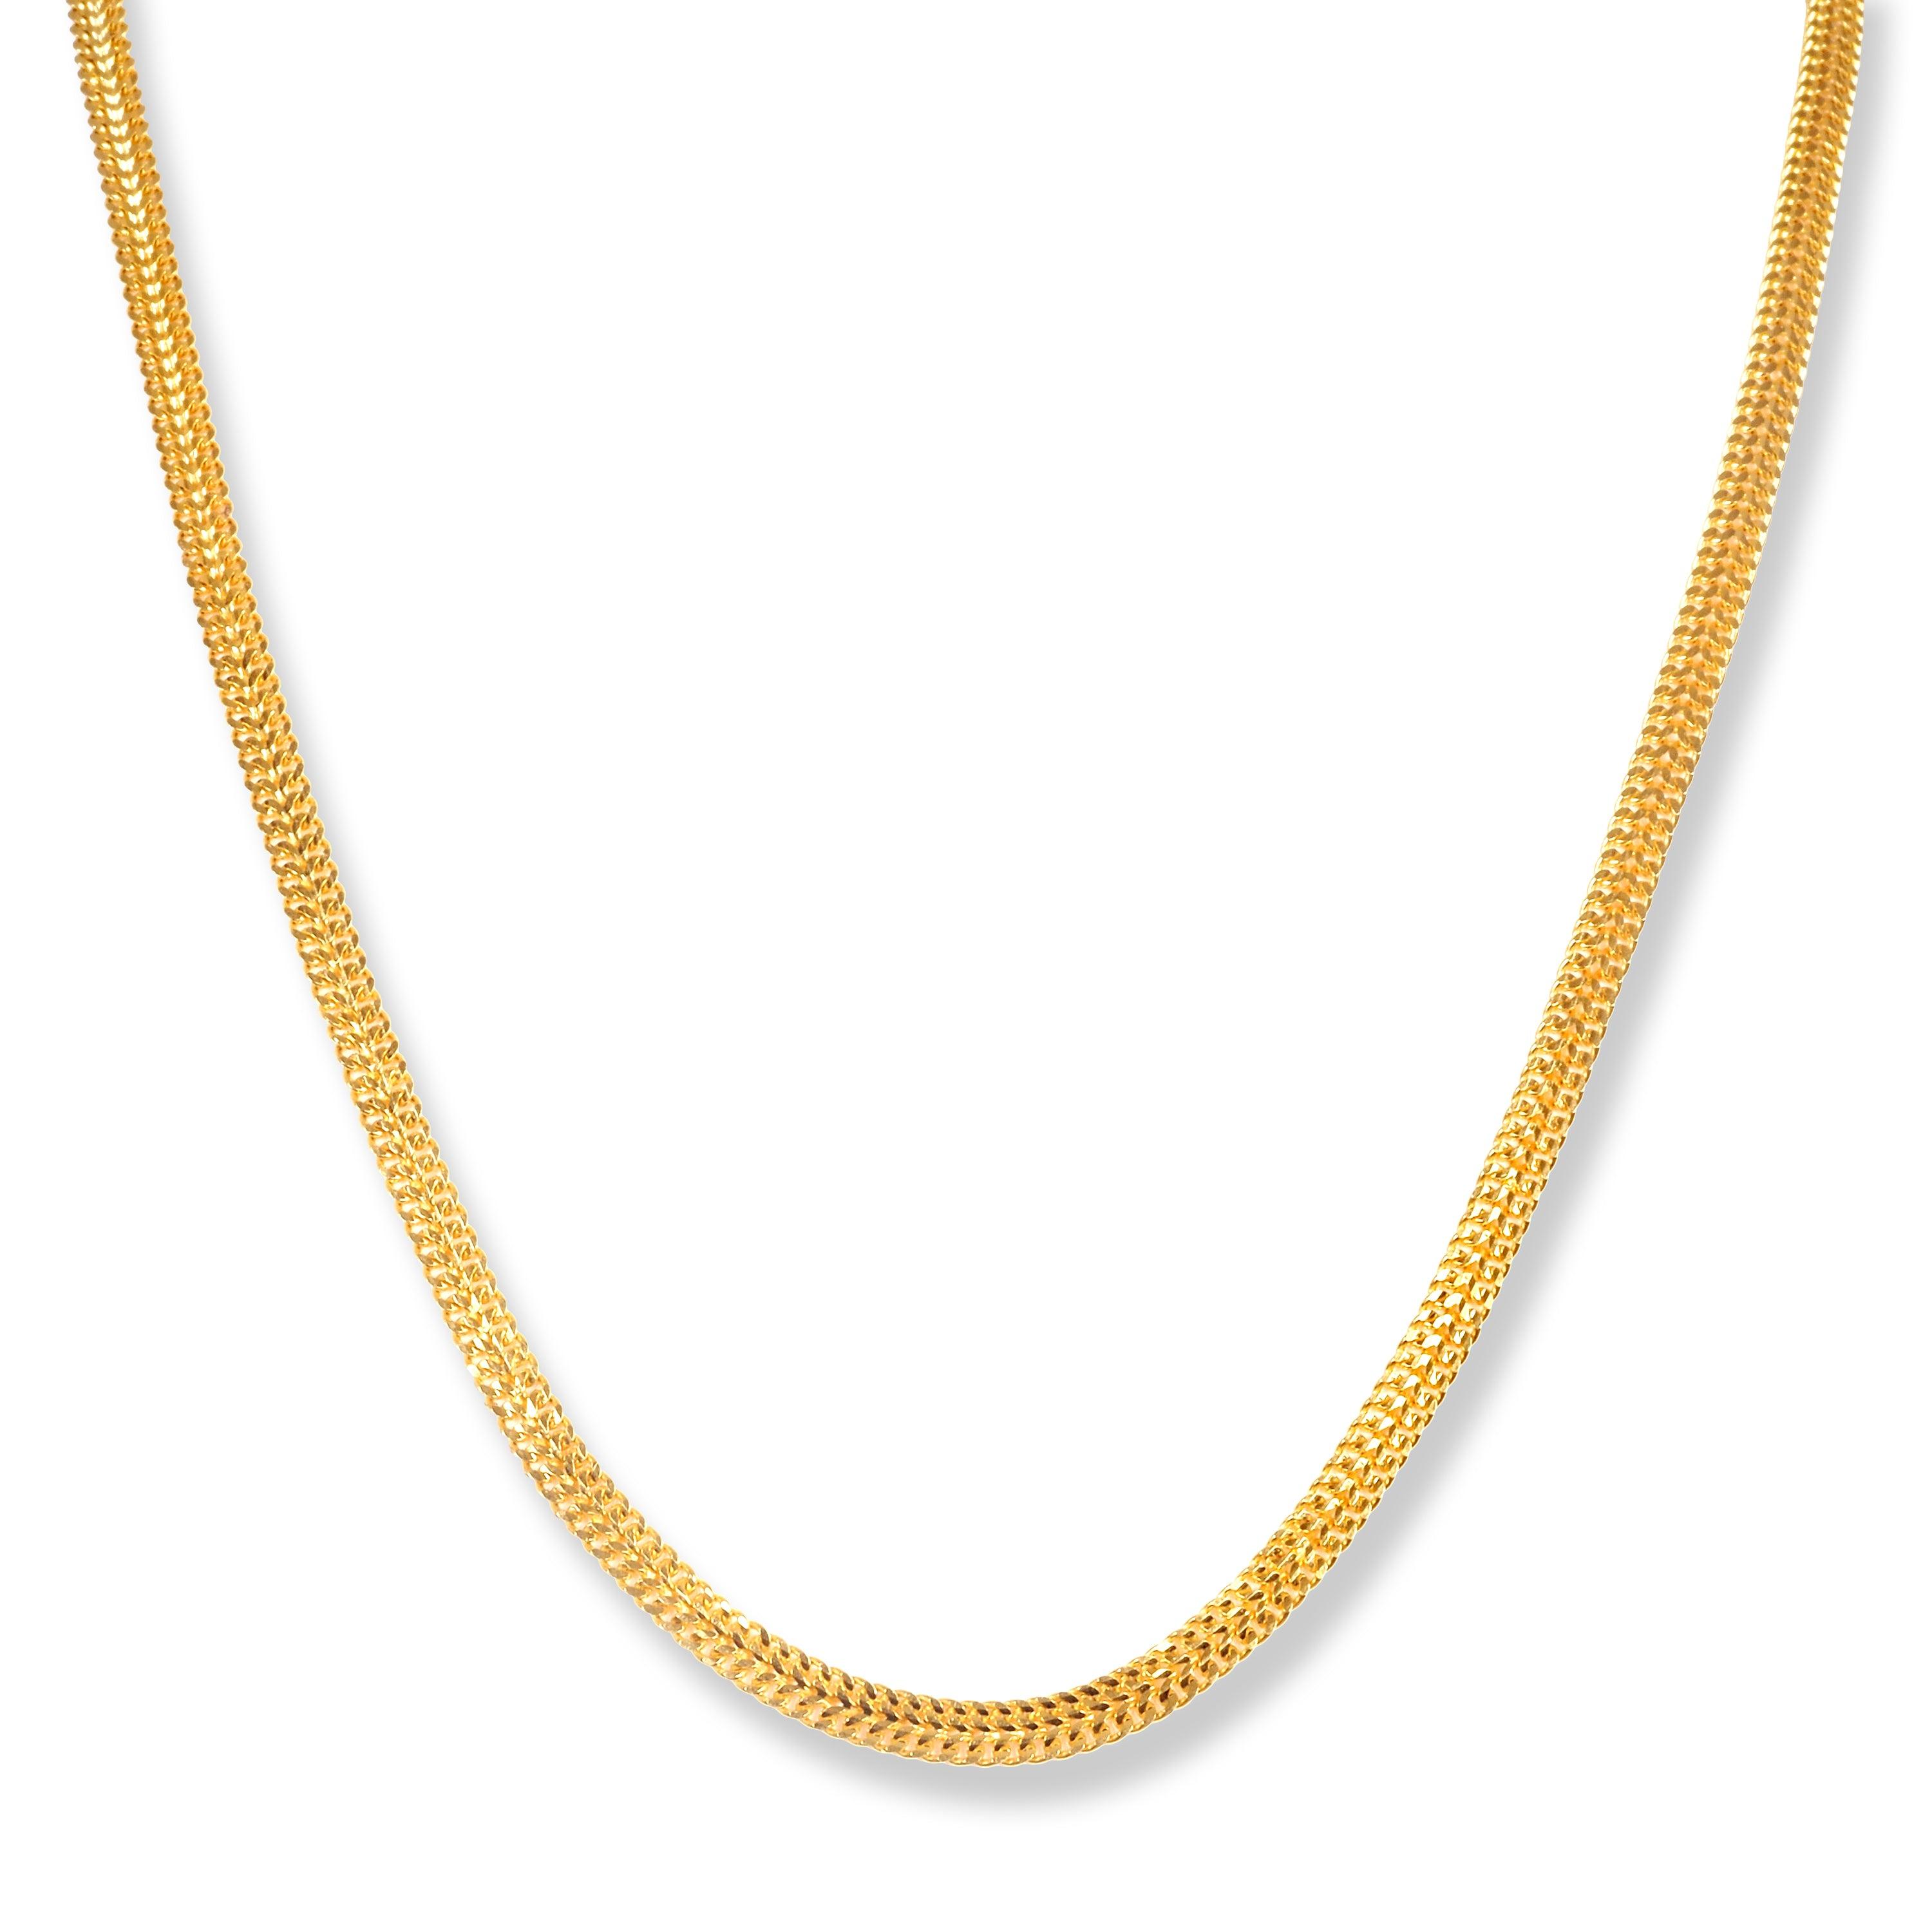 22ct Gold Flat Chain with S Clasp C-7140 - Minar Jewellers